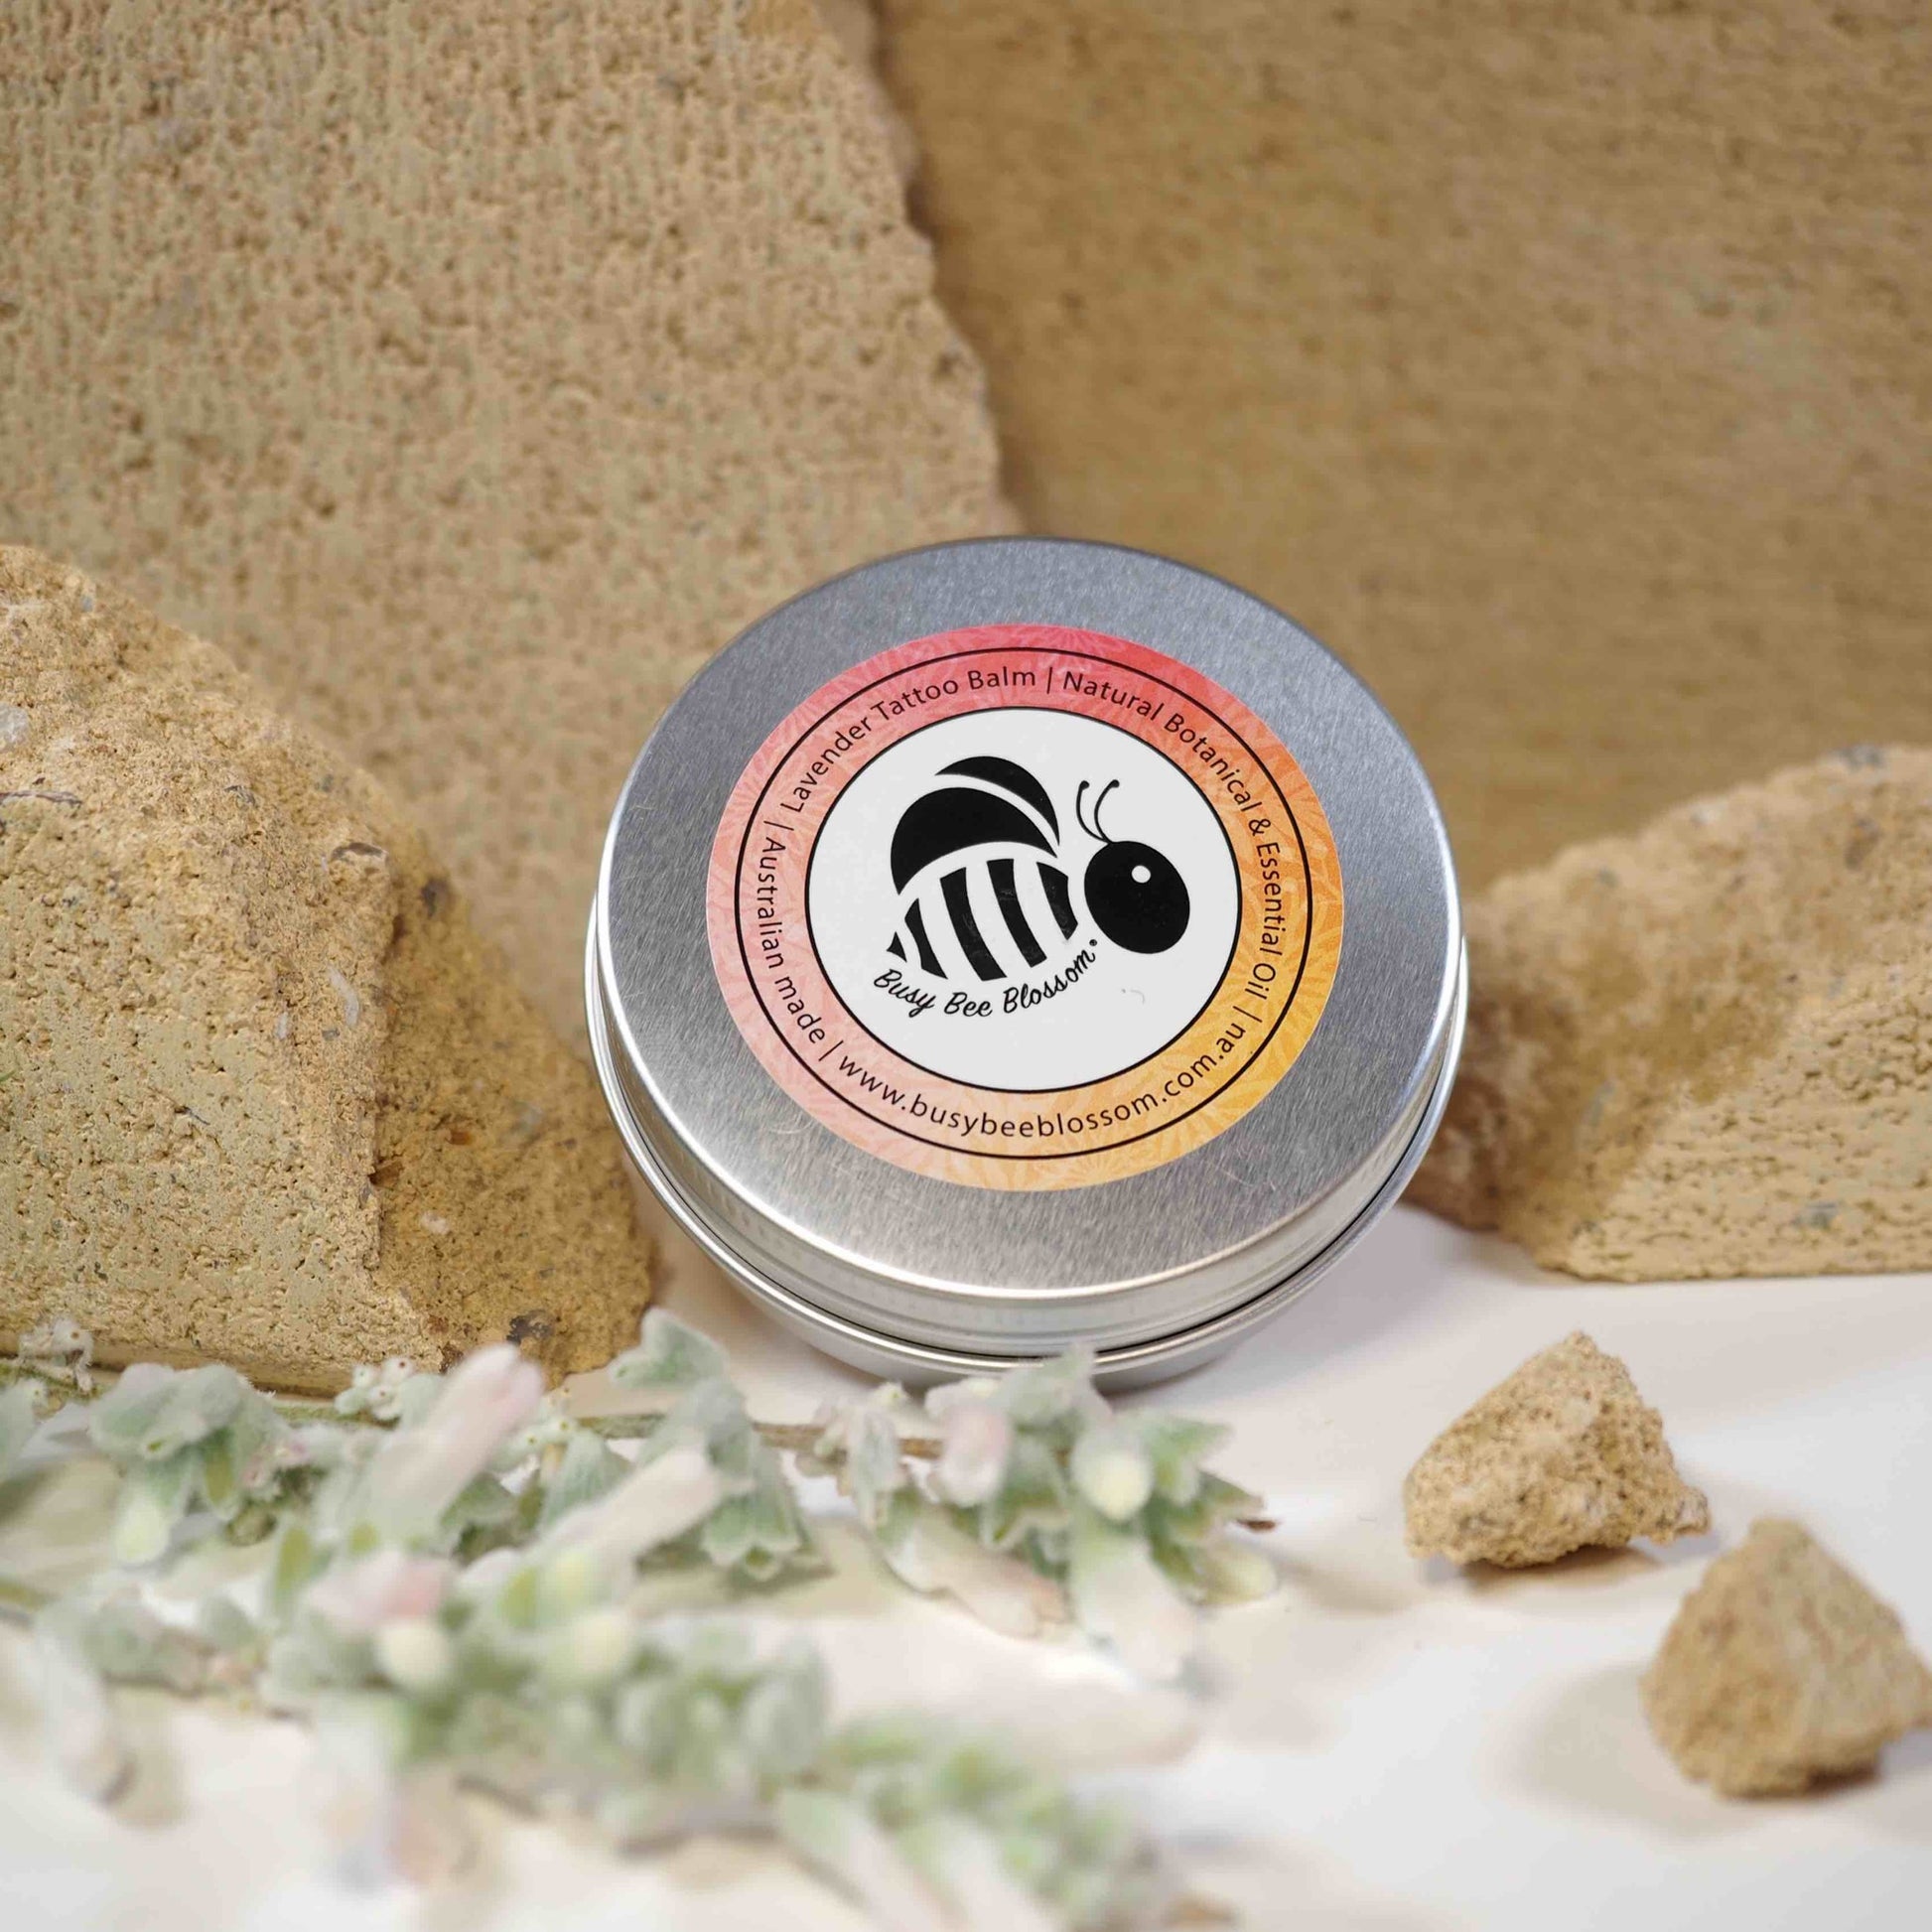 Lavender tattoo balm with organic butters to deeply moisturise. Easy to go anywhere tin packaging.